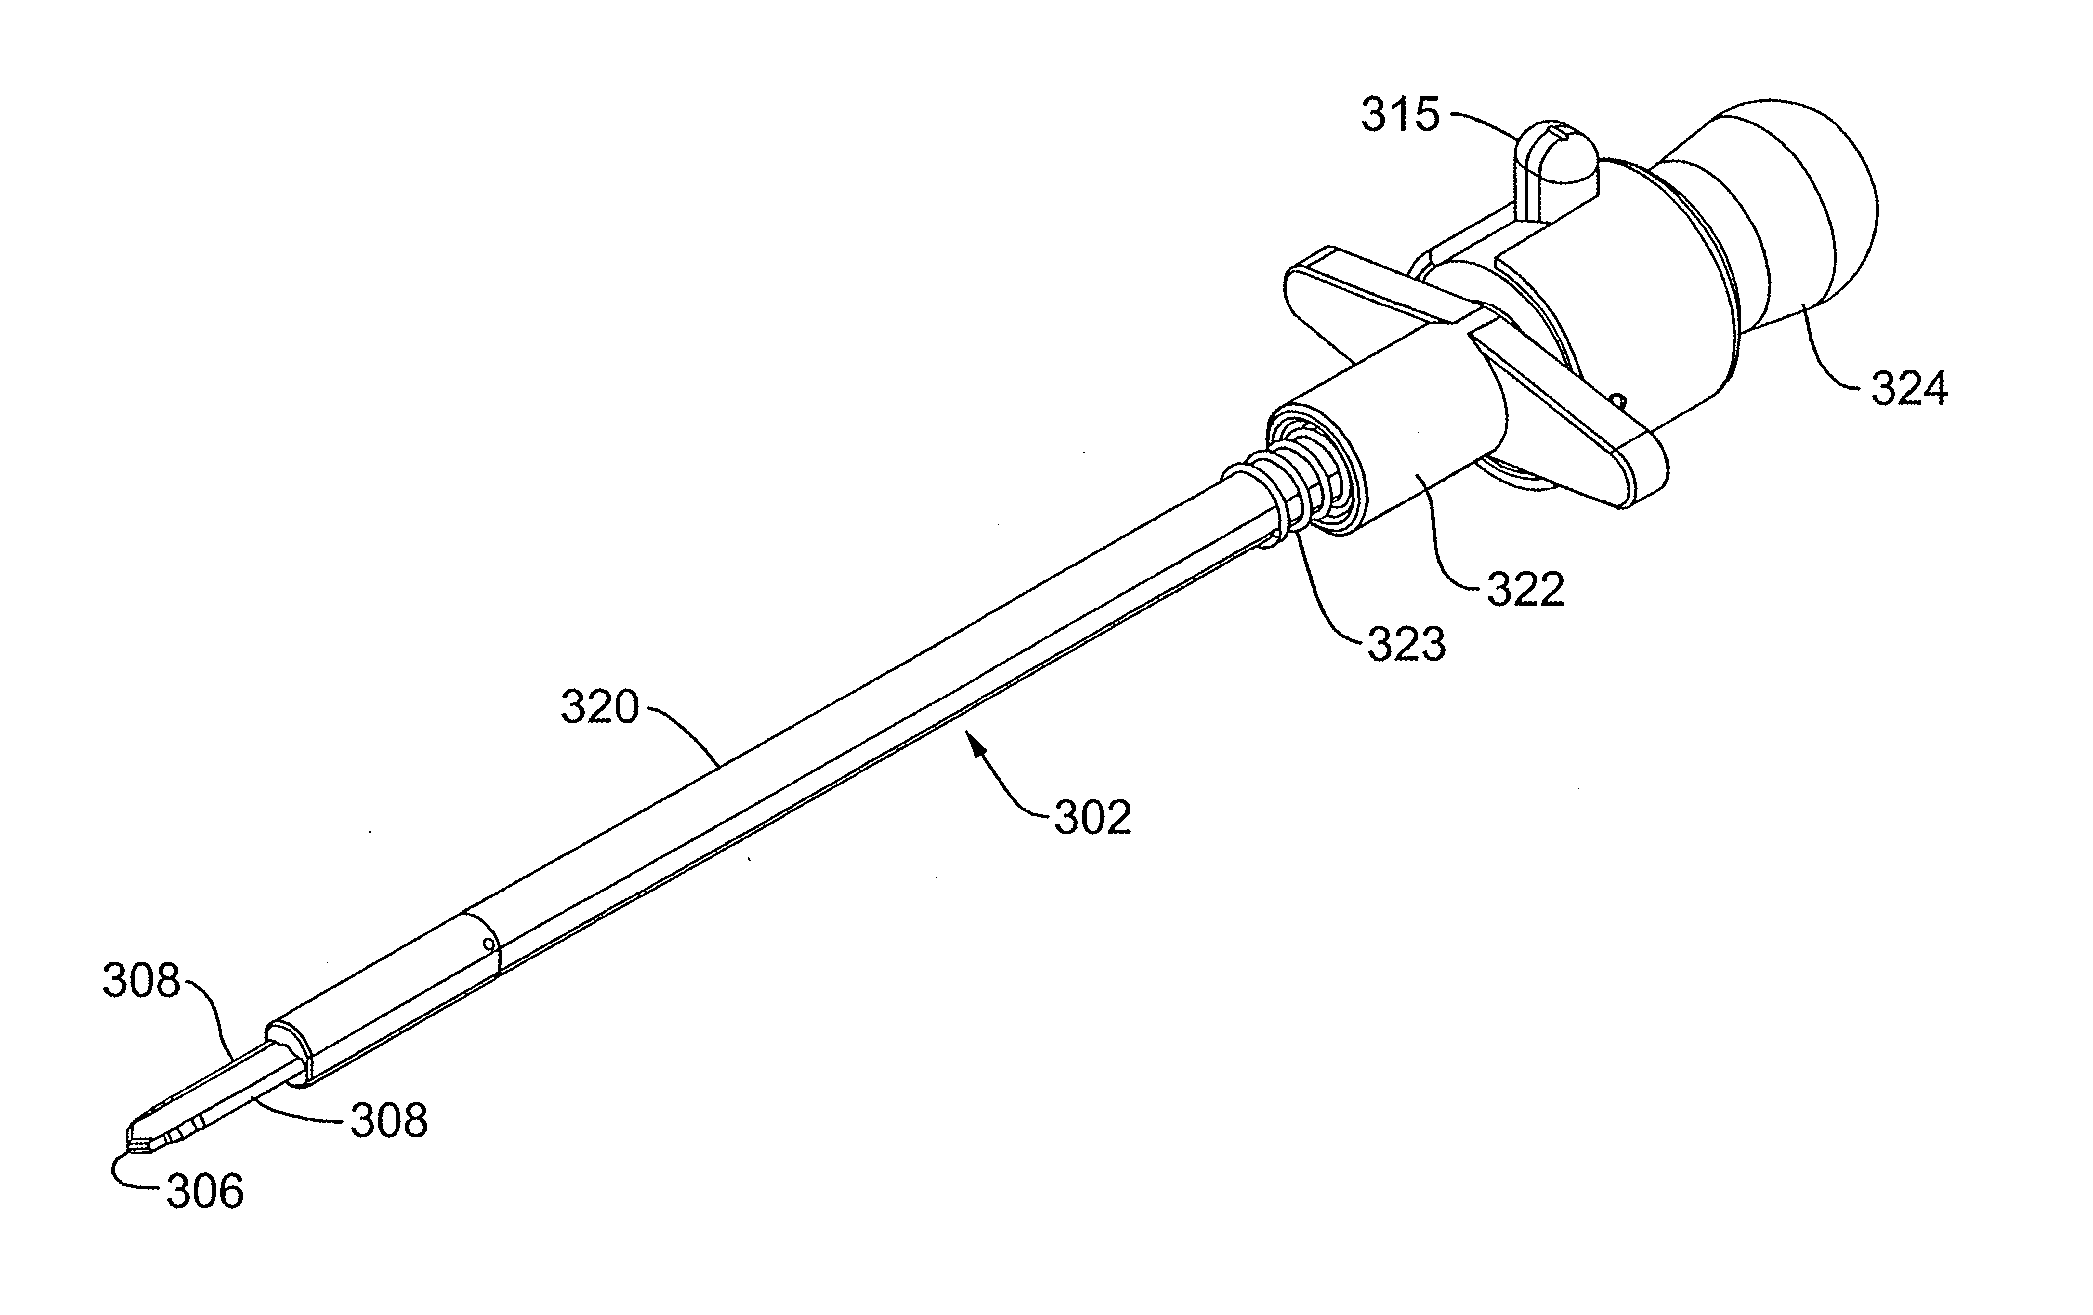 Apparatus and method for forming pilot holes in bone and delivering fasteners therein for retaining an implant